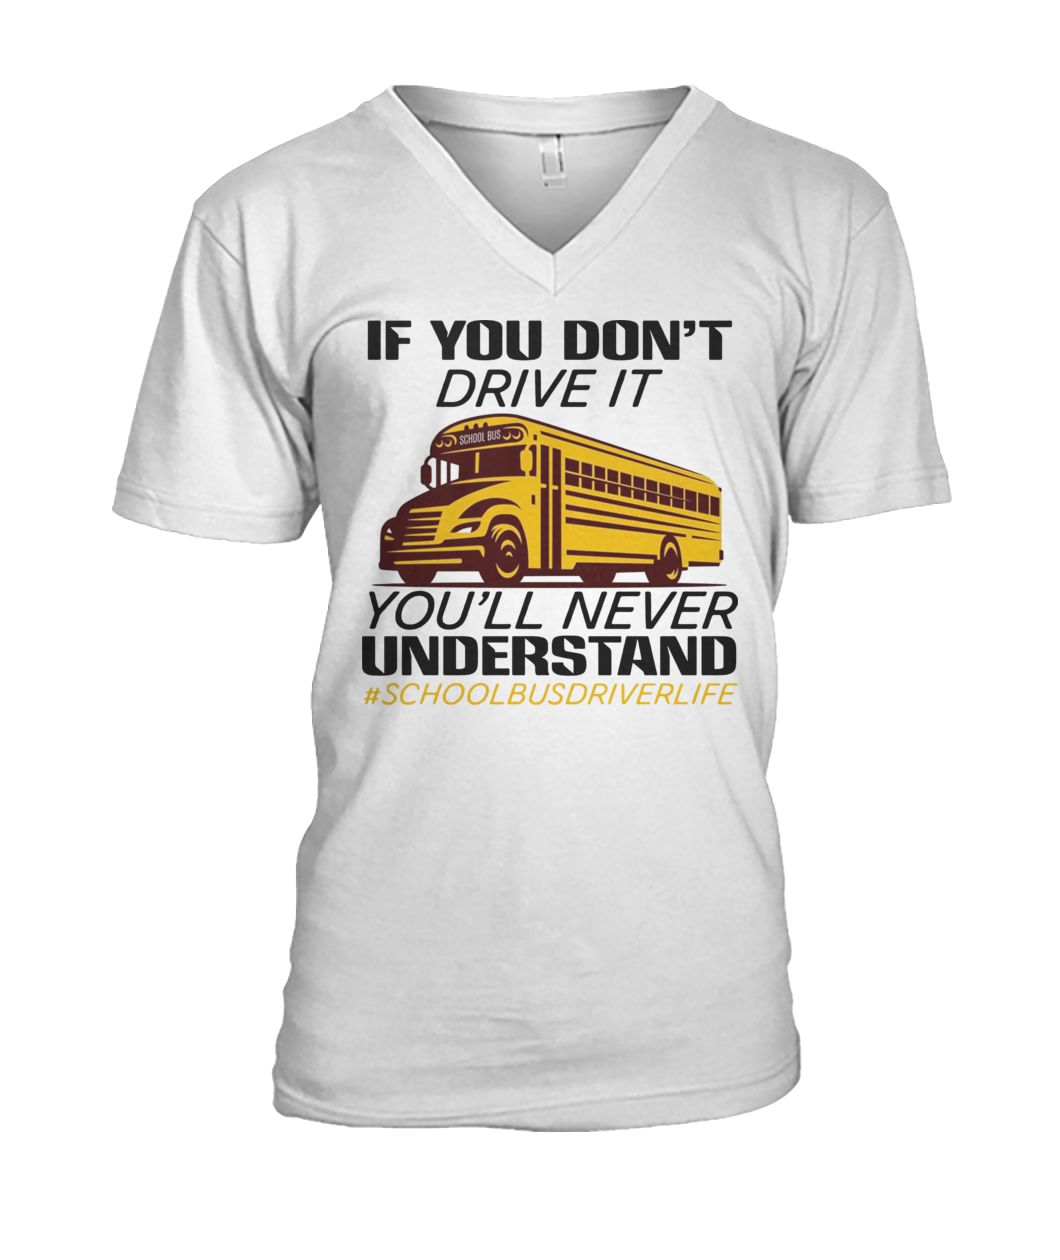 If you don't drive it you'll never understand #schoolbusdriverlife mens v-neck